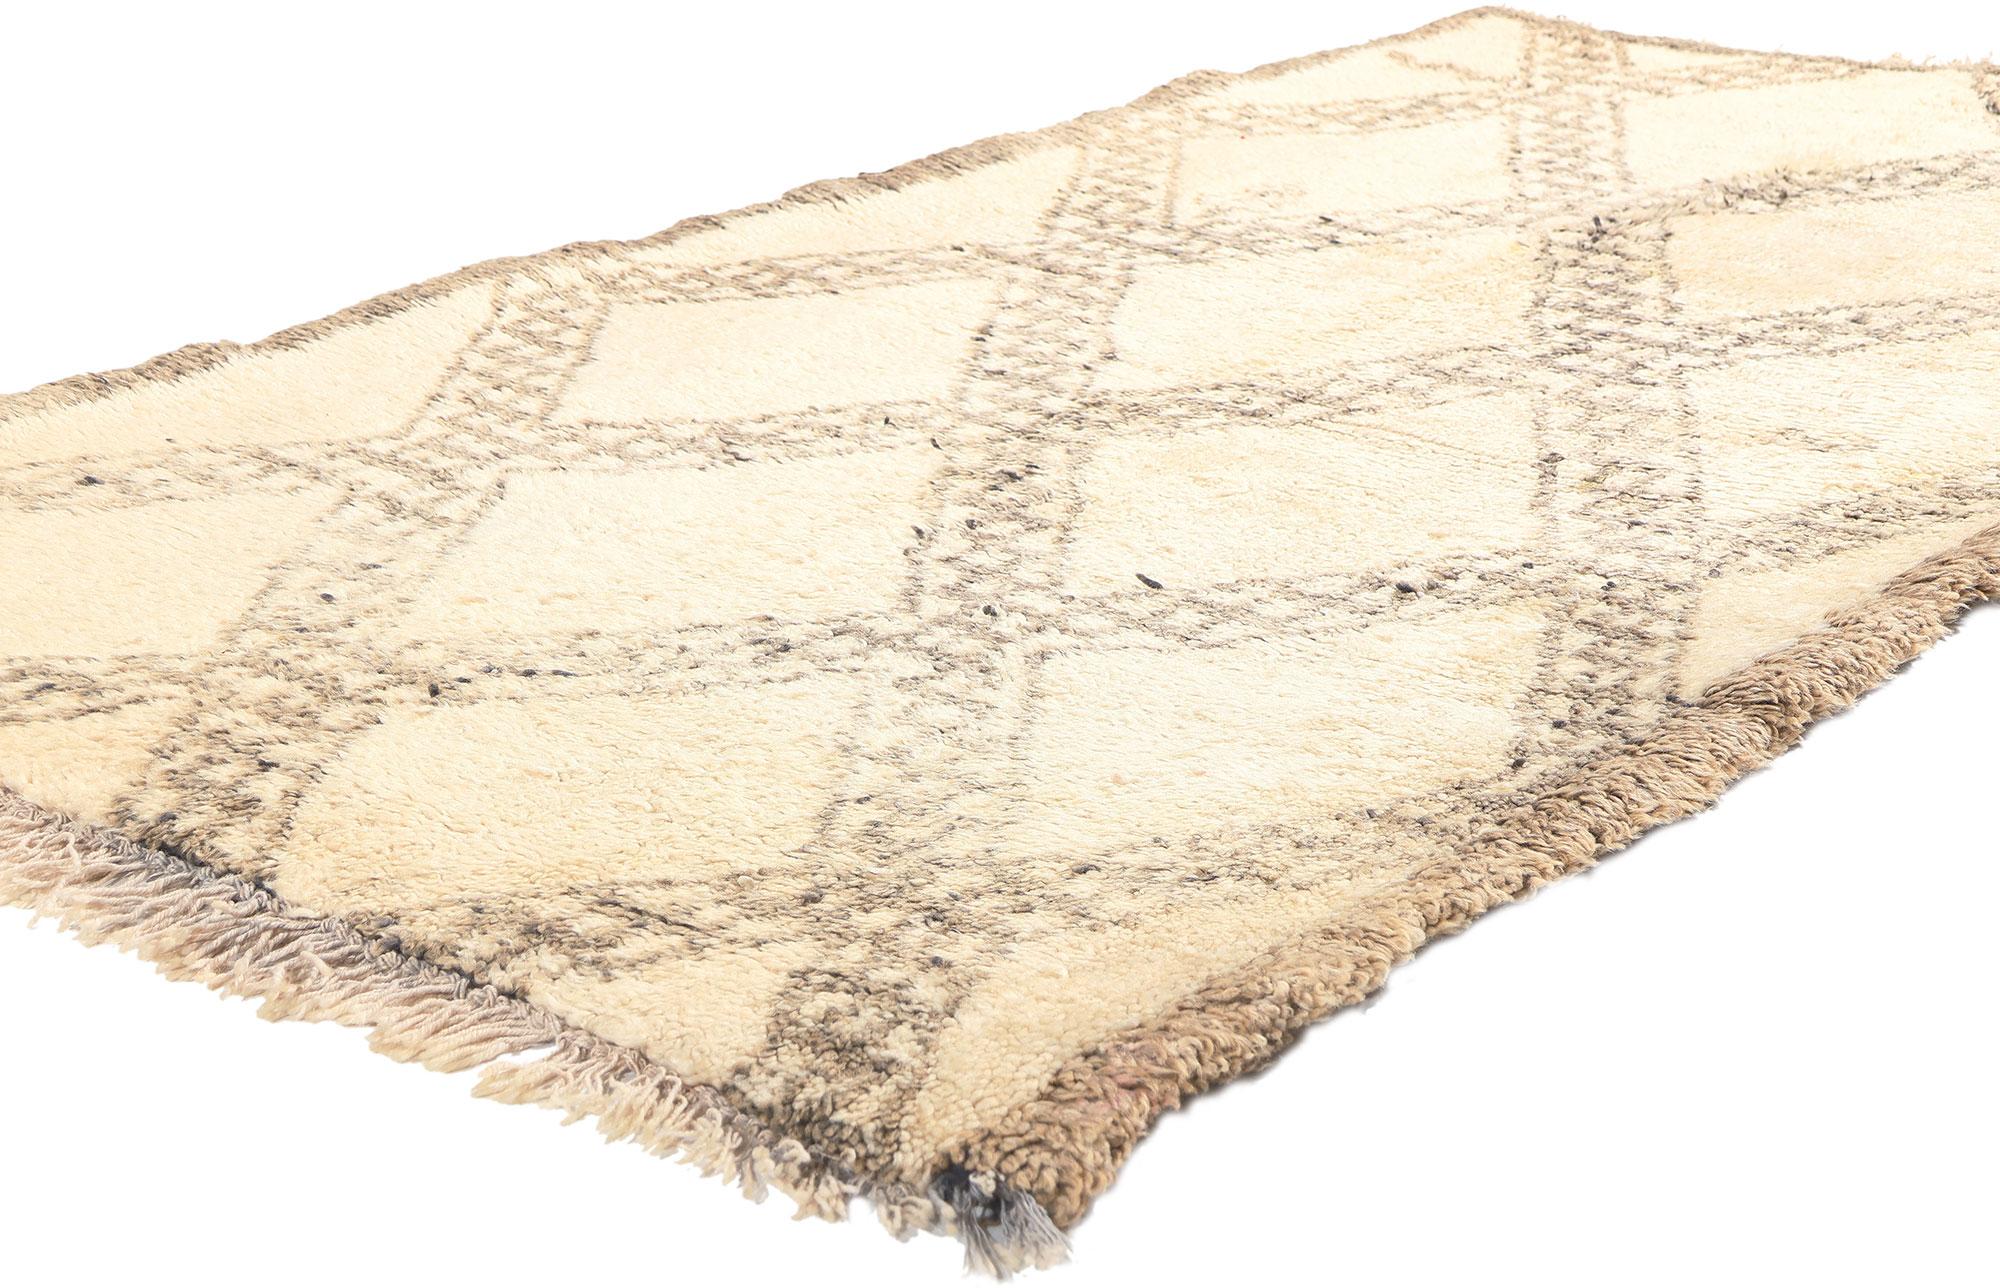 20224 Vintage Moroccan Beni Ourain Rug, 03'04 X 06'02.
Nomadic charm meets modern Bauhaus style in this hand-knotted wool vintage Moroccan Beni Ourain rug. The detailed diamond trellis design and neutral earth-tone colors woven into this piece work